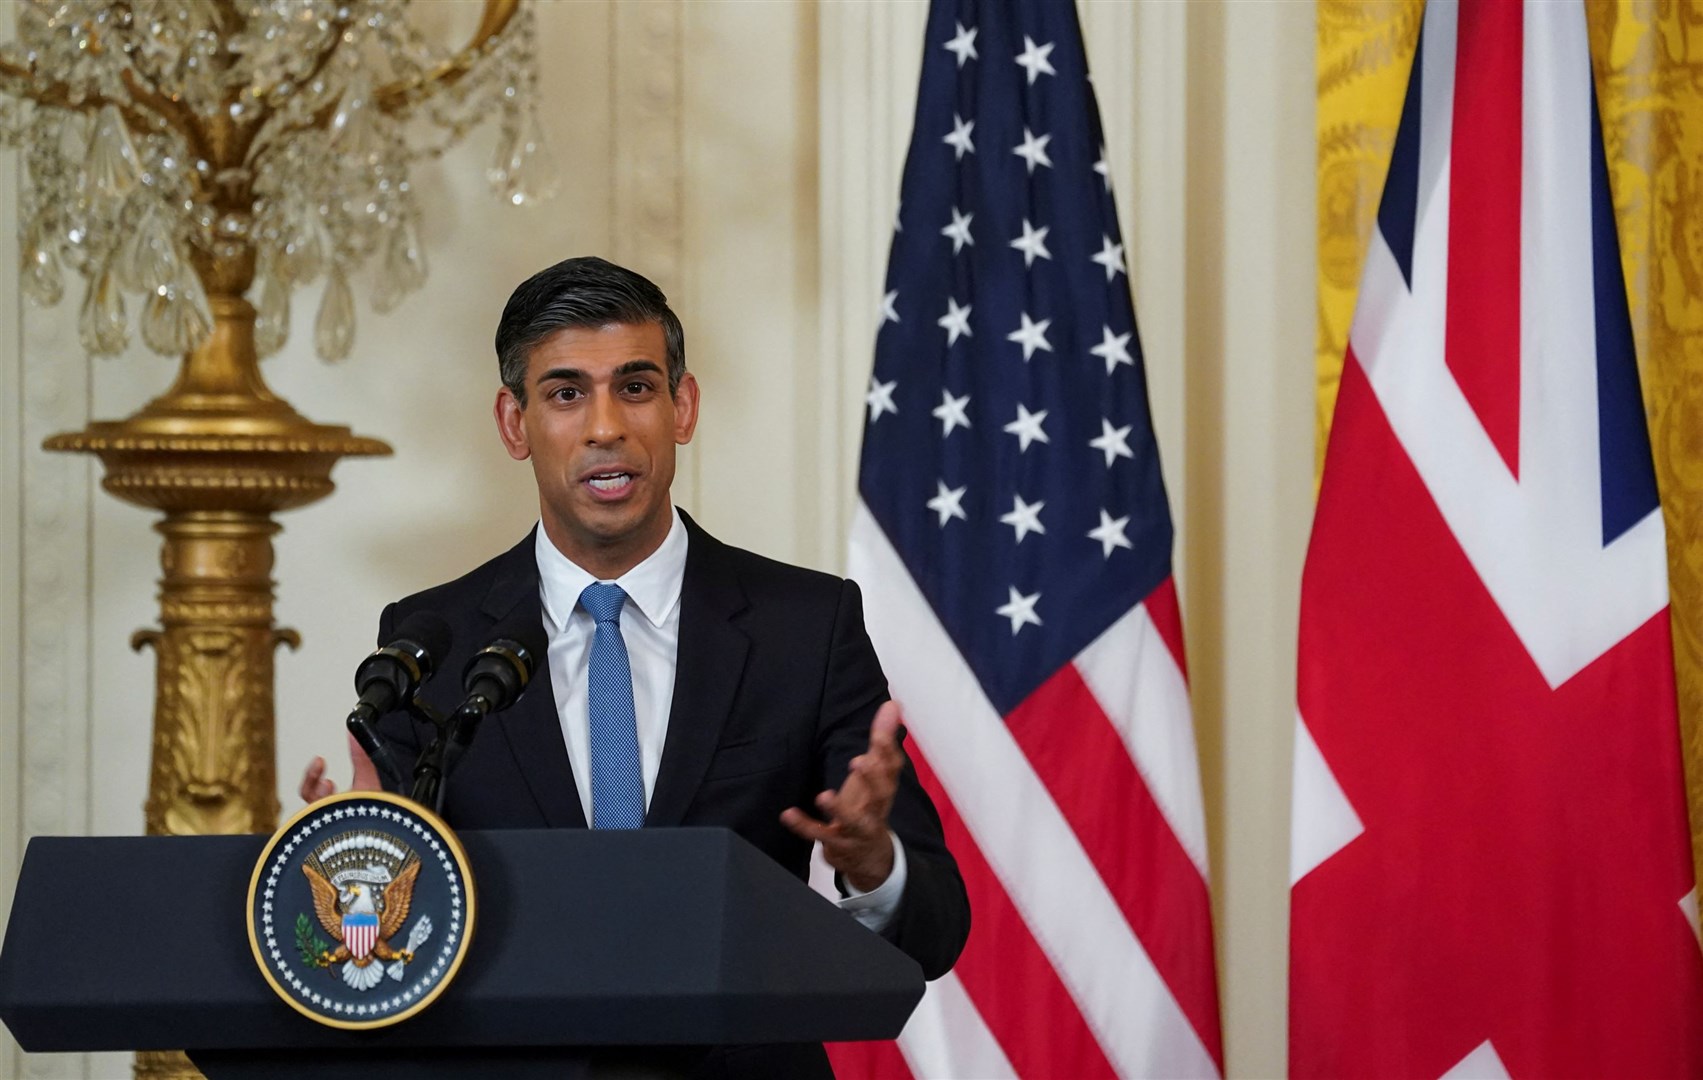 Mr Sunak praised Mr Biden’s experience on foreign affairs (Kevin Lamarque/PA)